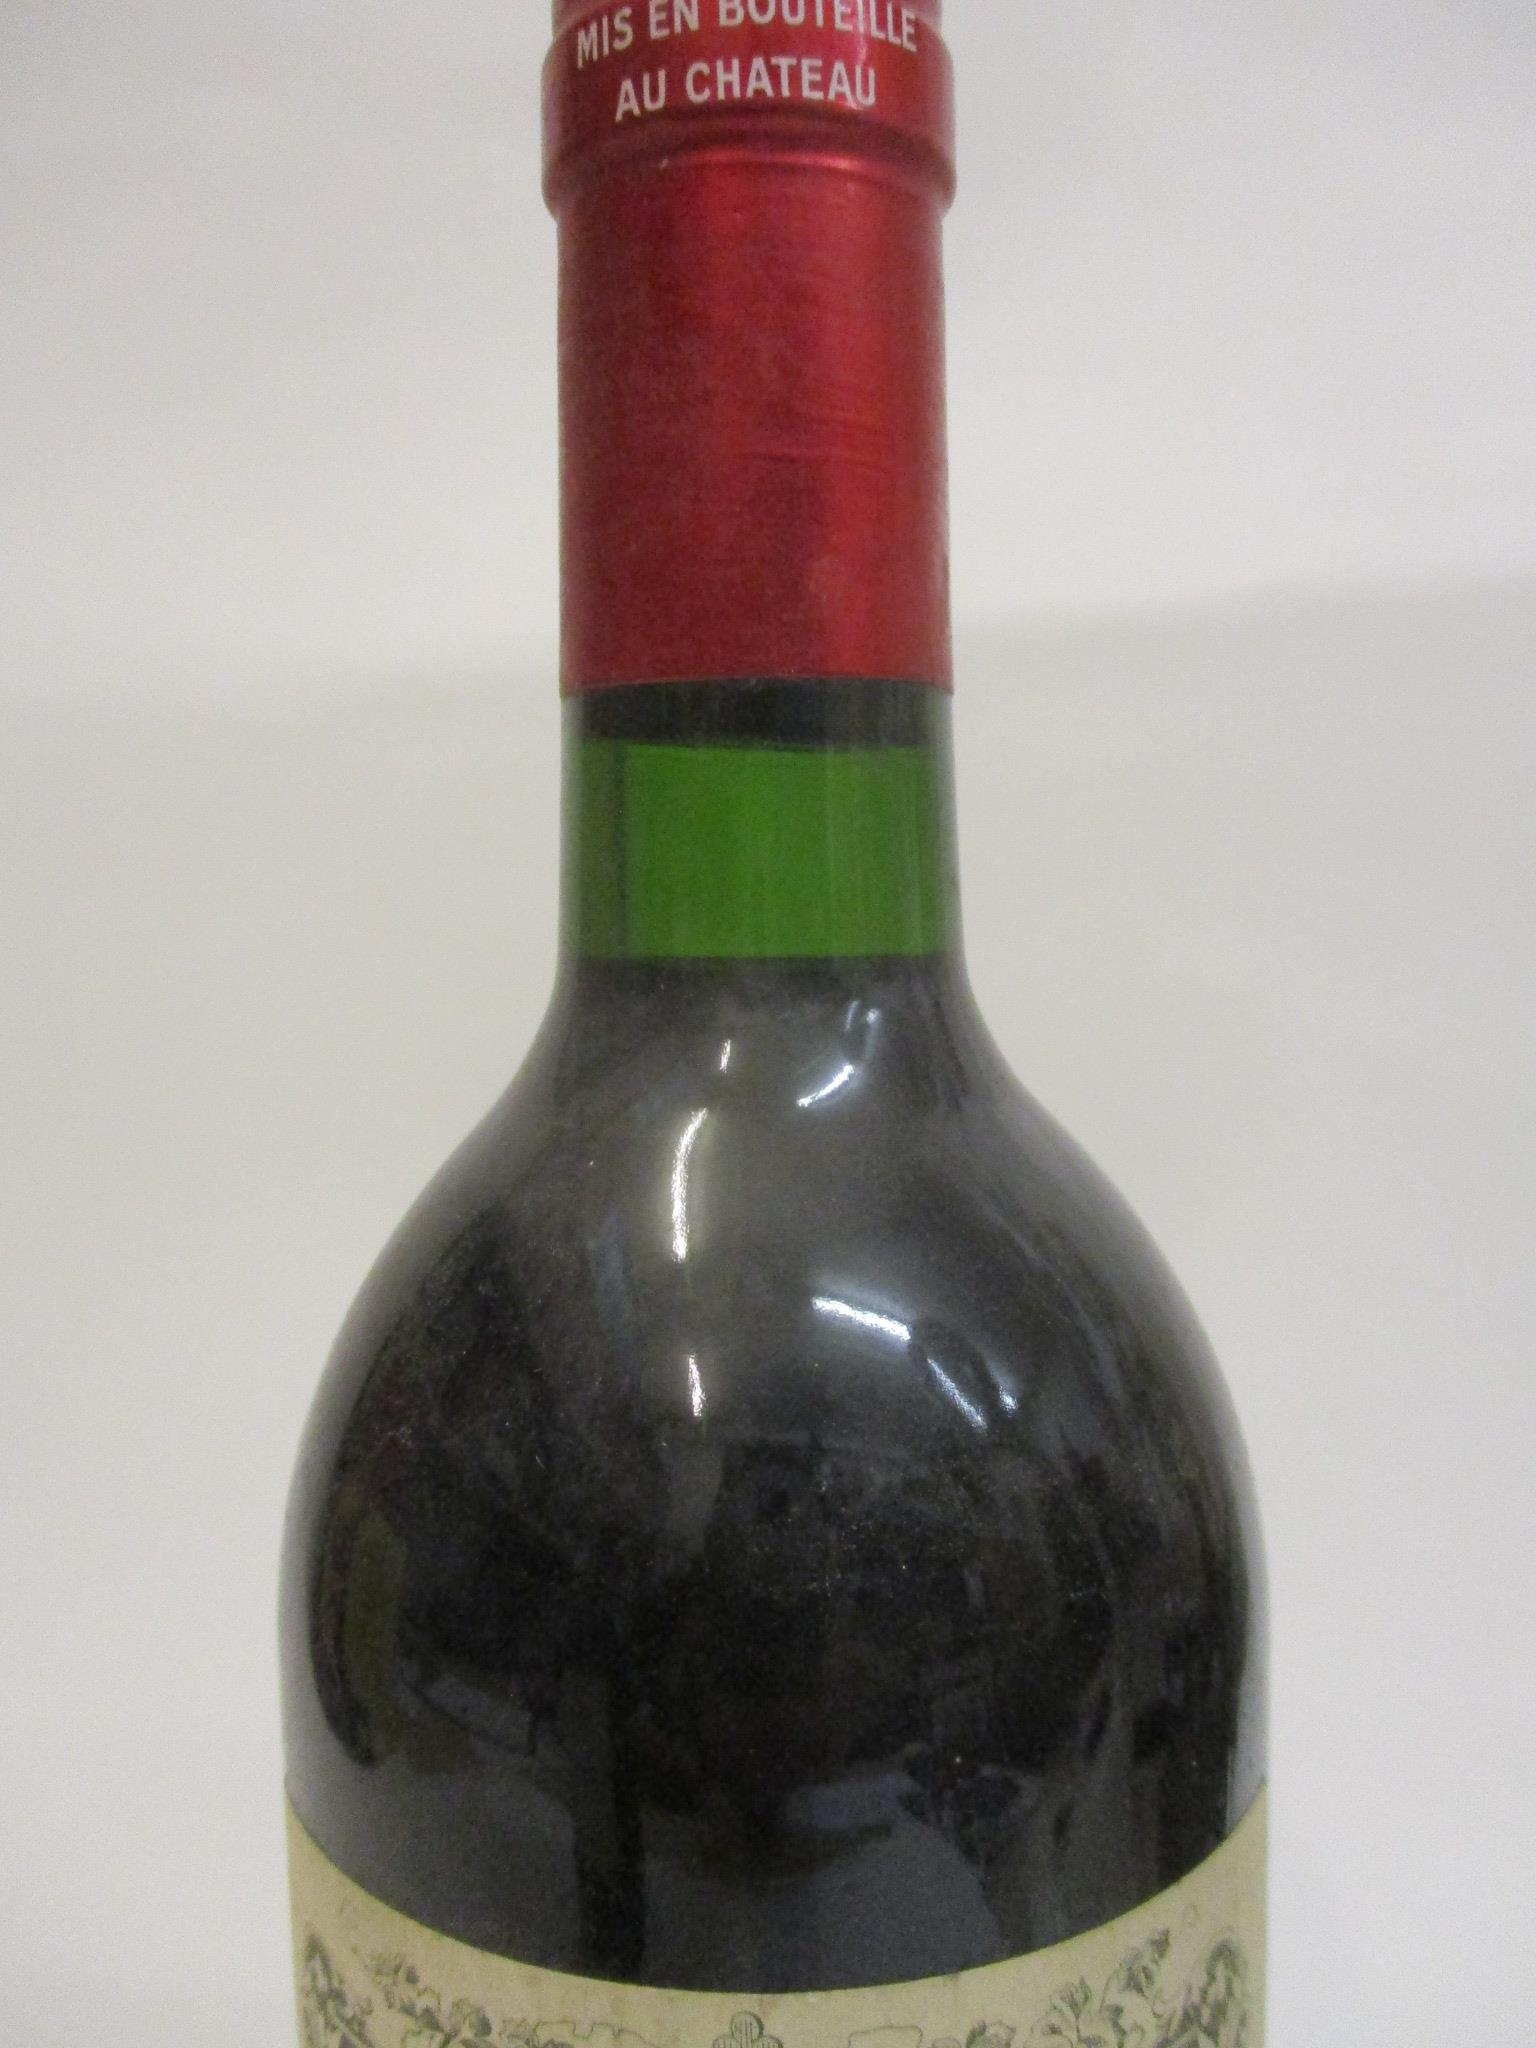 One bottle of Petrus Pomerol Grand Vin, 1987, 75cl - Image 3 of 3